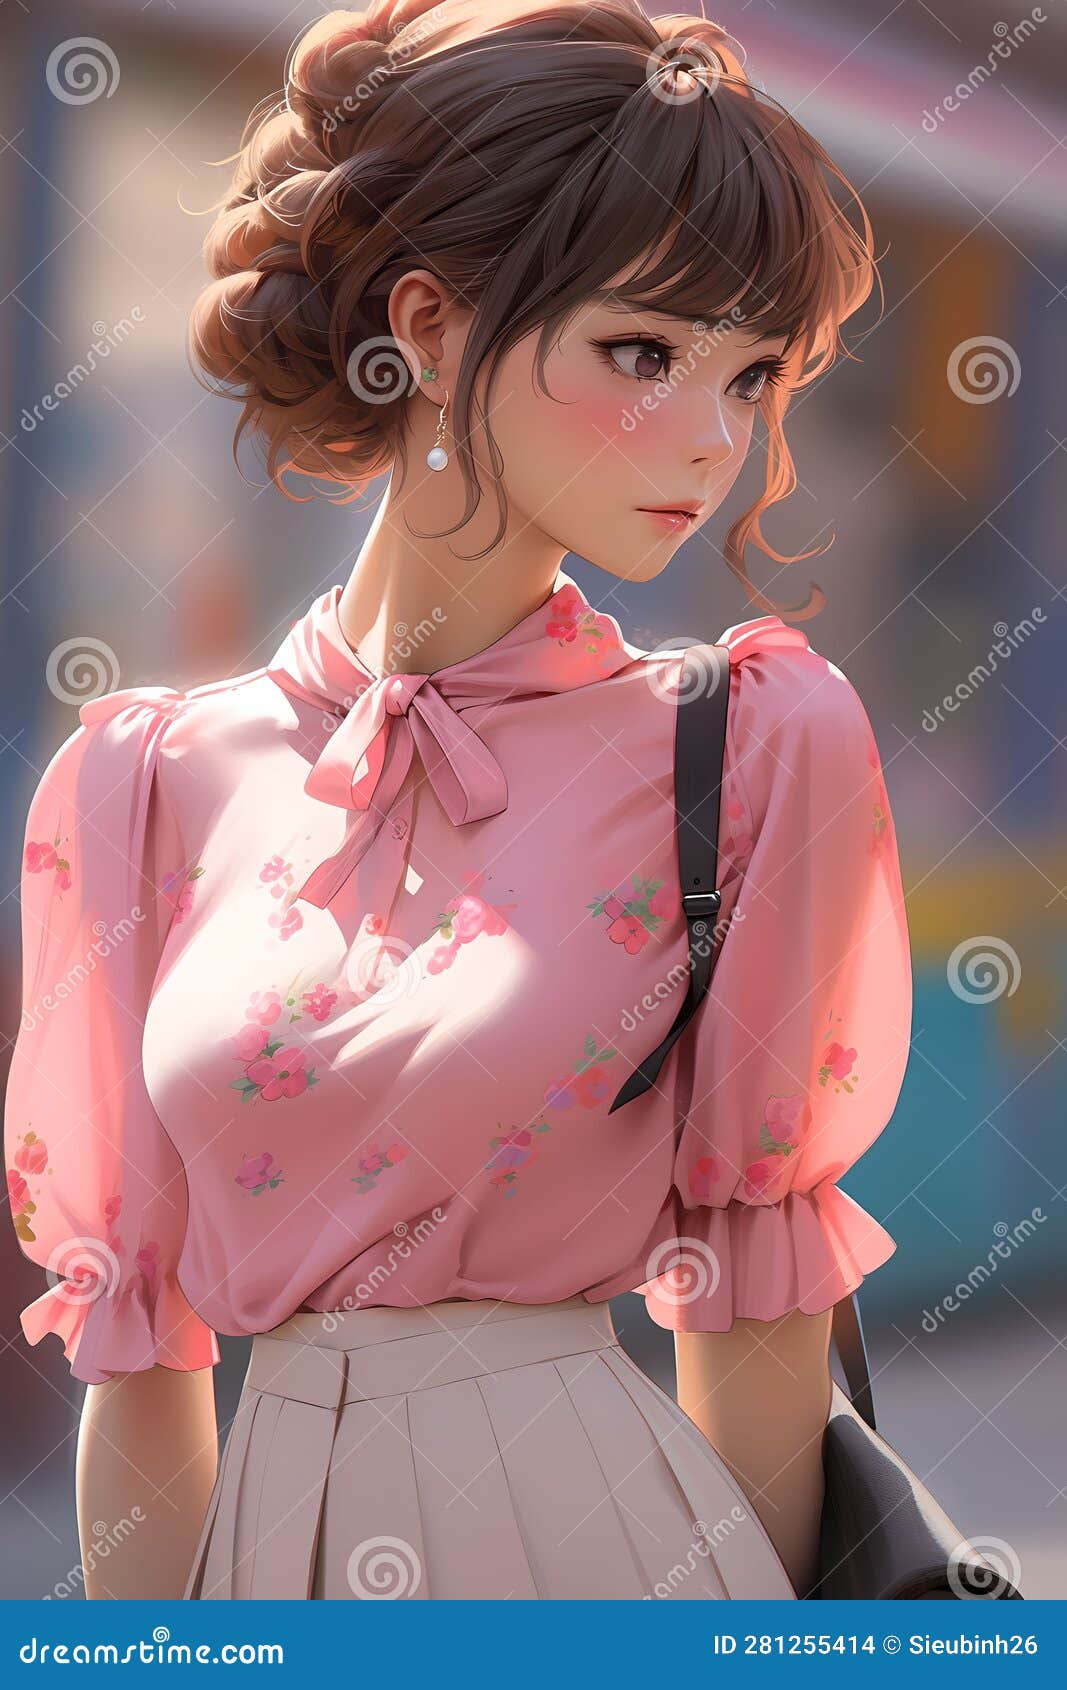 Lexica - Anime style, Full length sfw portrait of the most beautiful Asian  woman in the world , anime